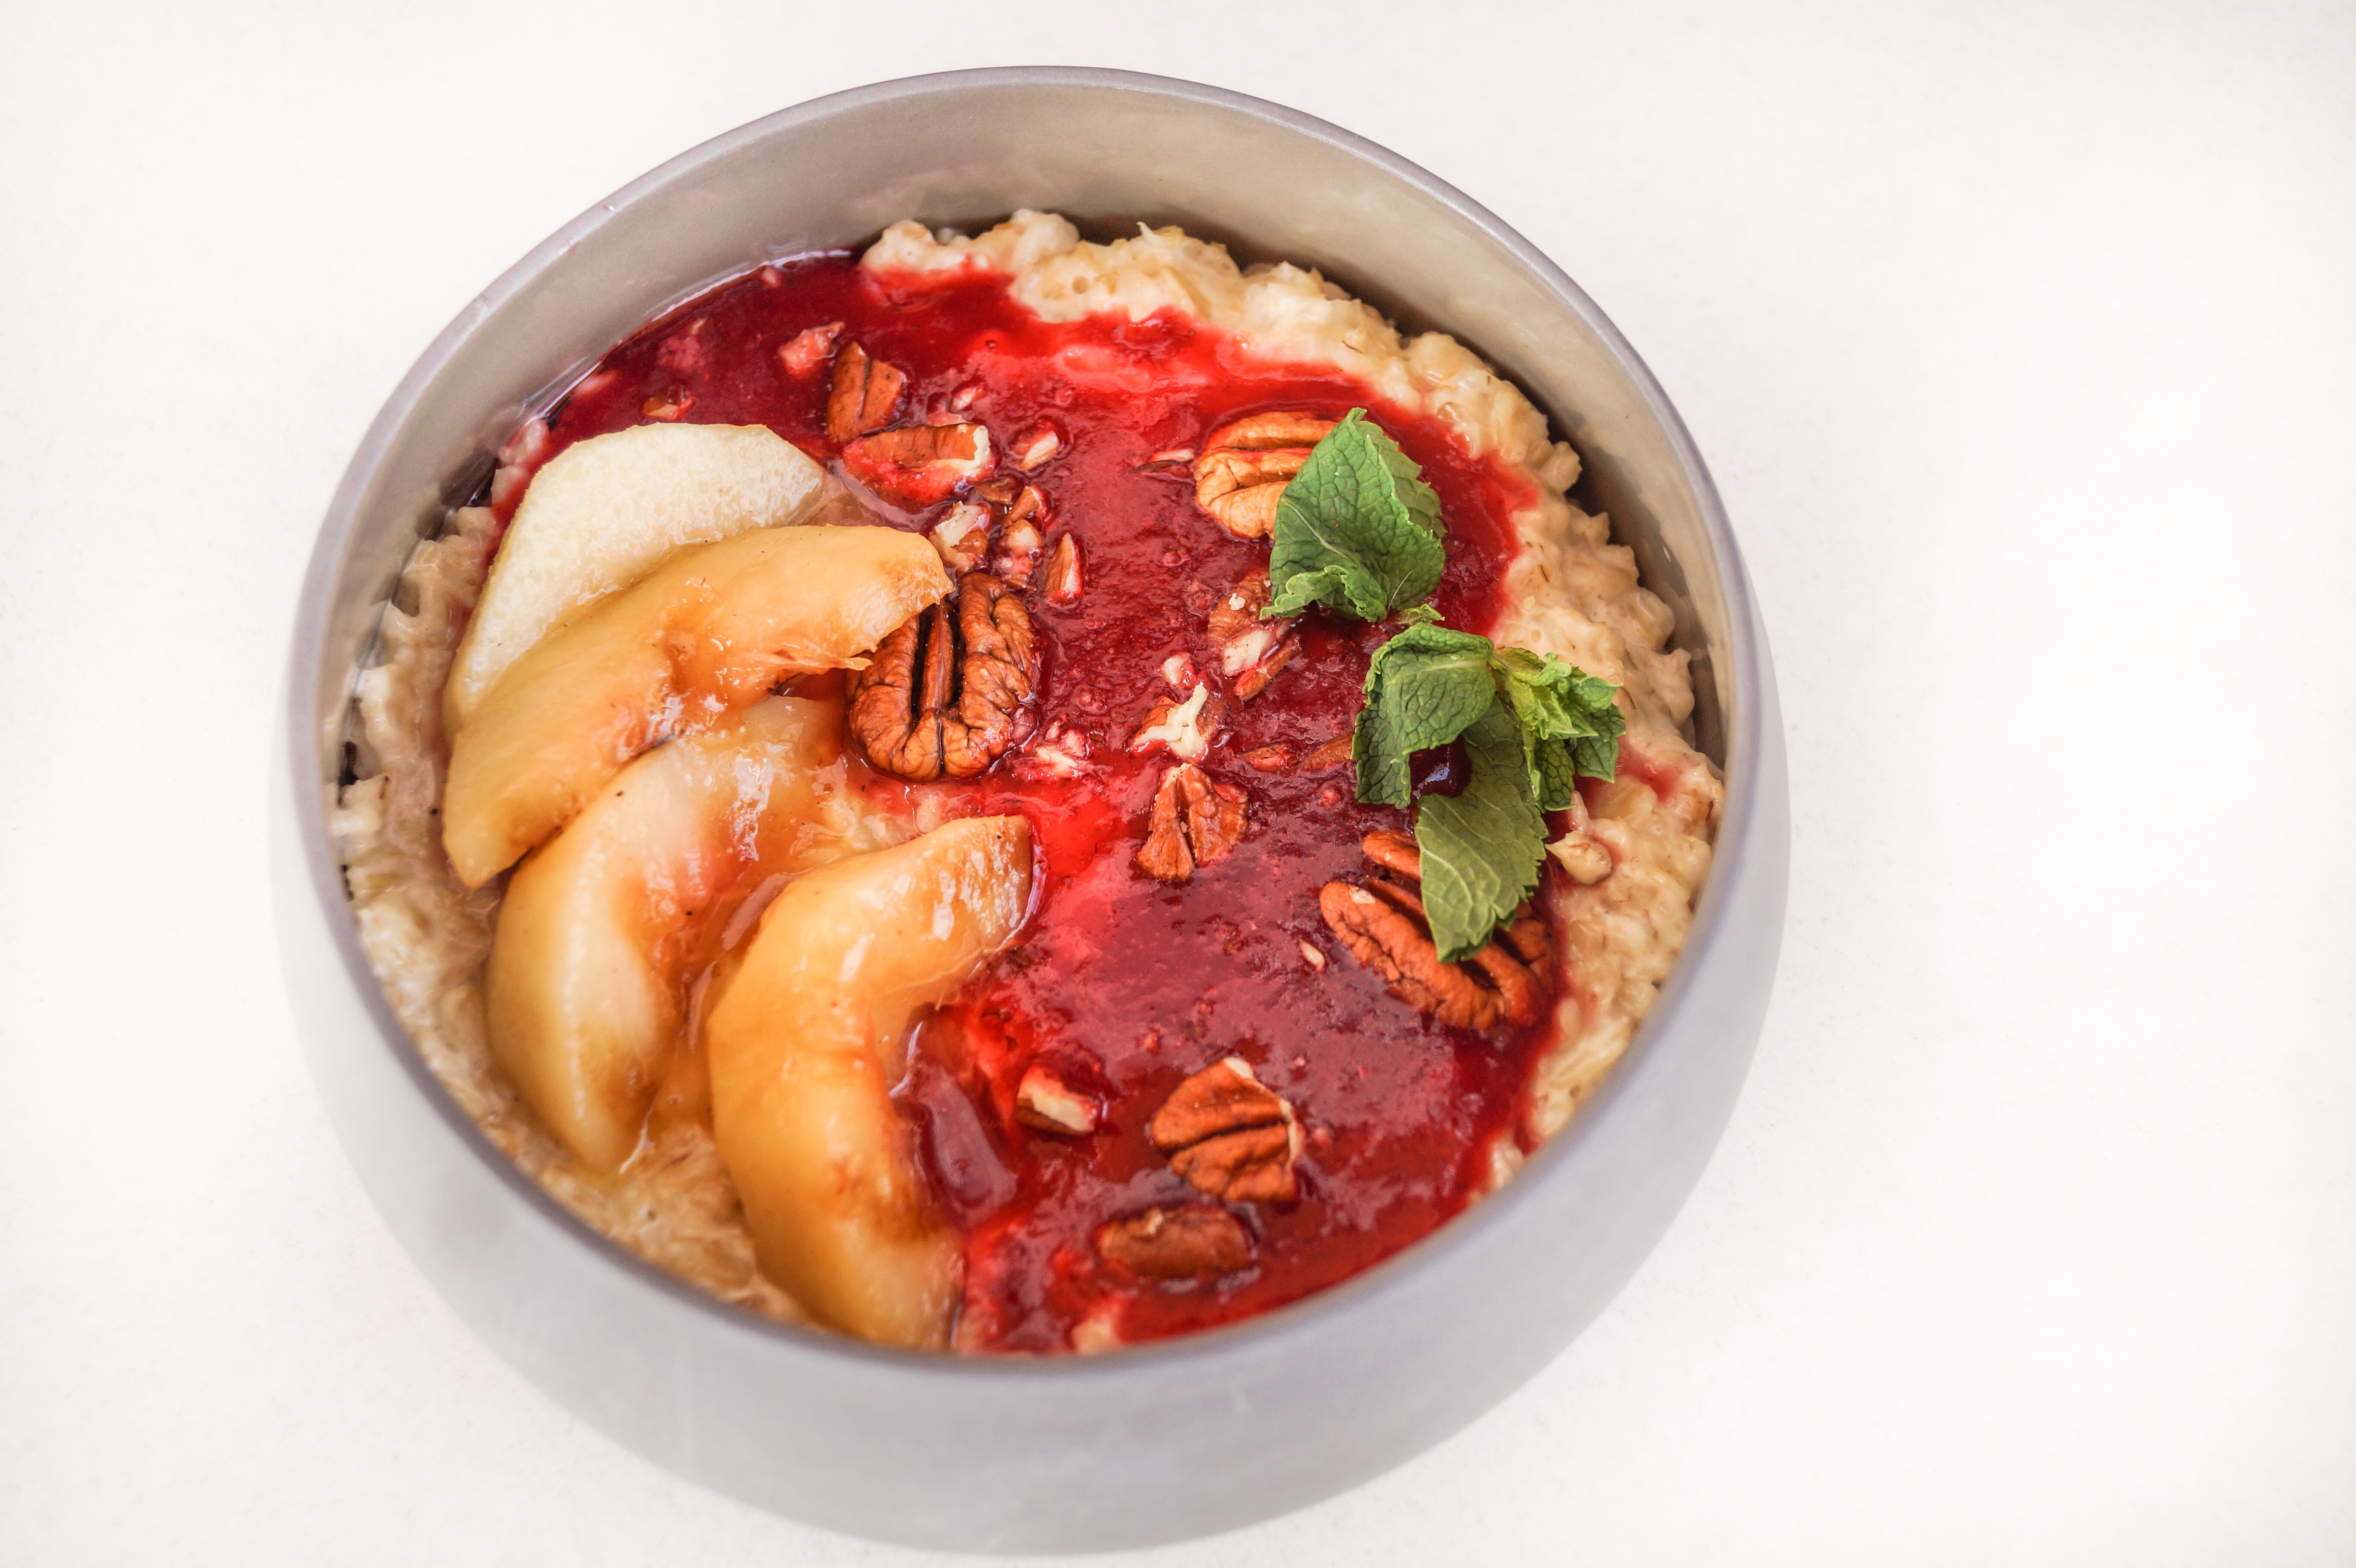 Oatmeal porridge with strawberry sauce, caramelized peaches and pecans